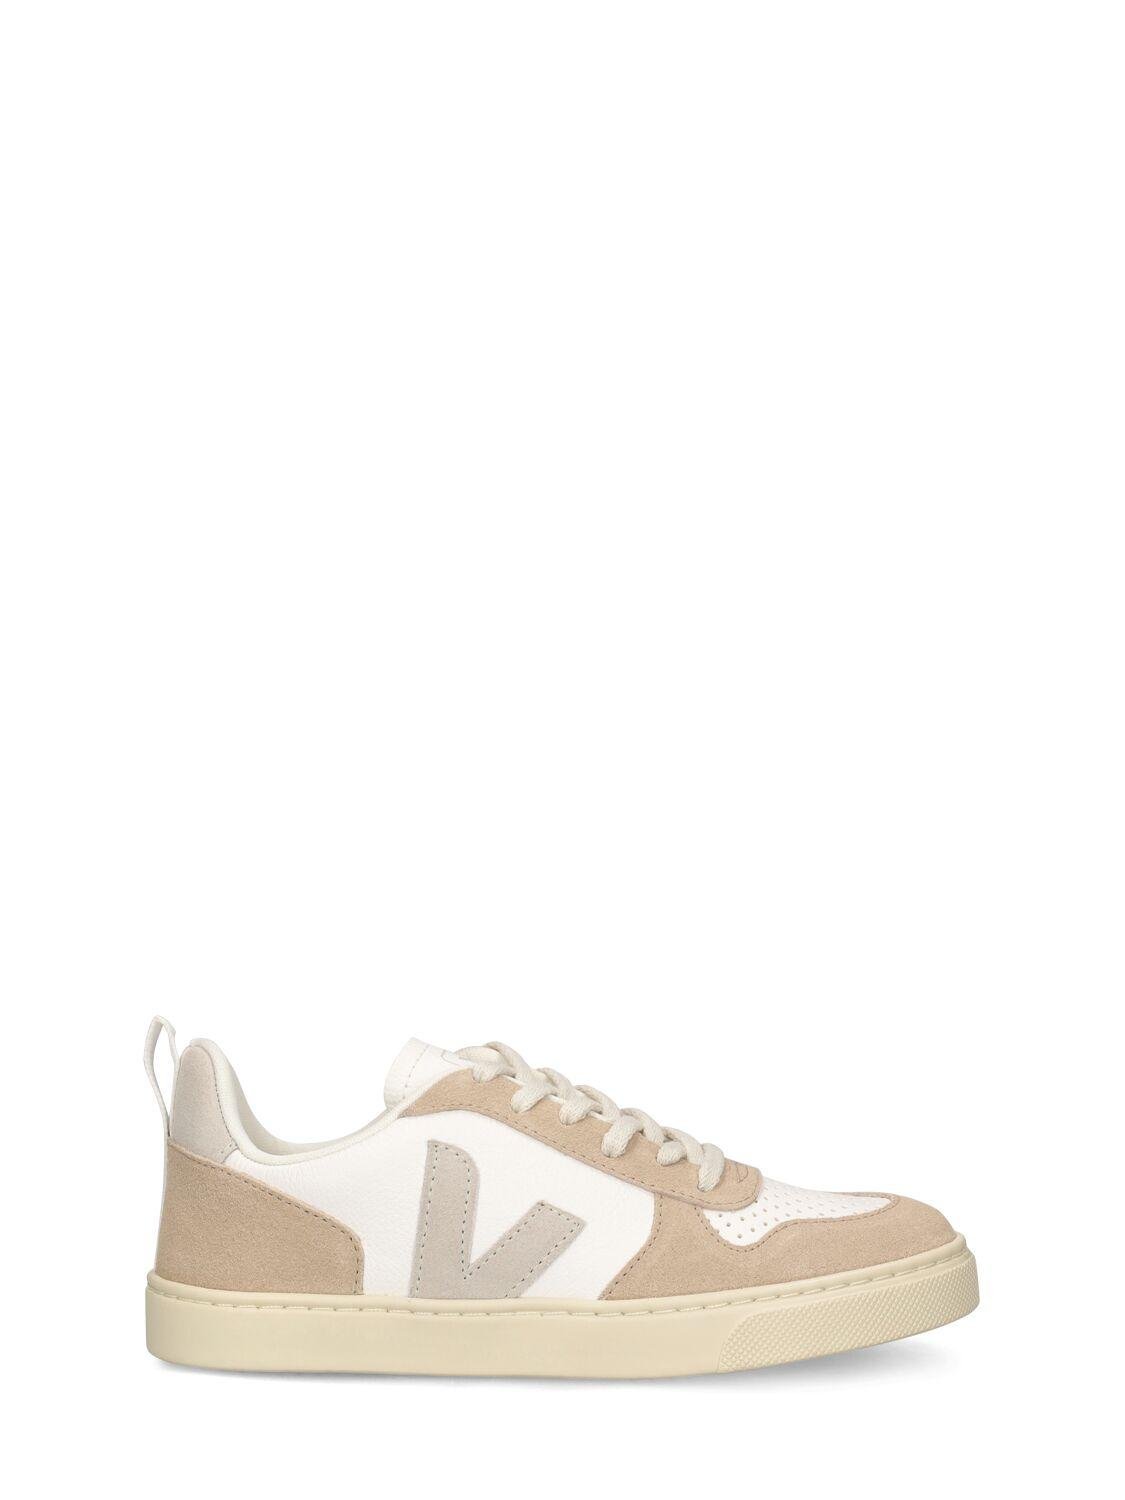 V-10 Chrome-free Leather Sneakers by VEJA